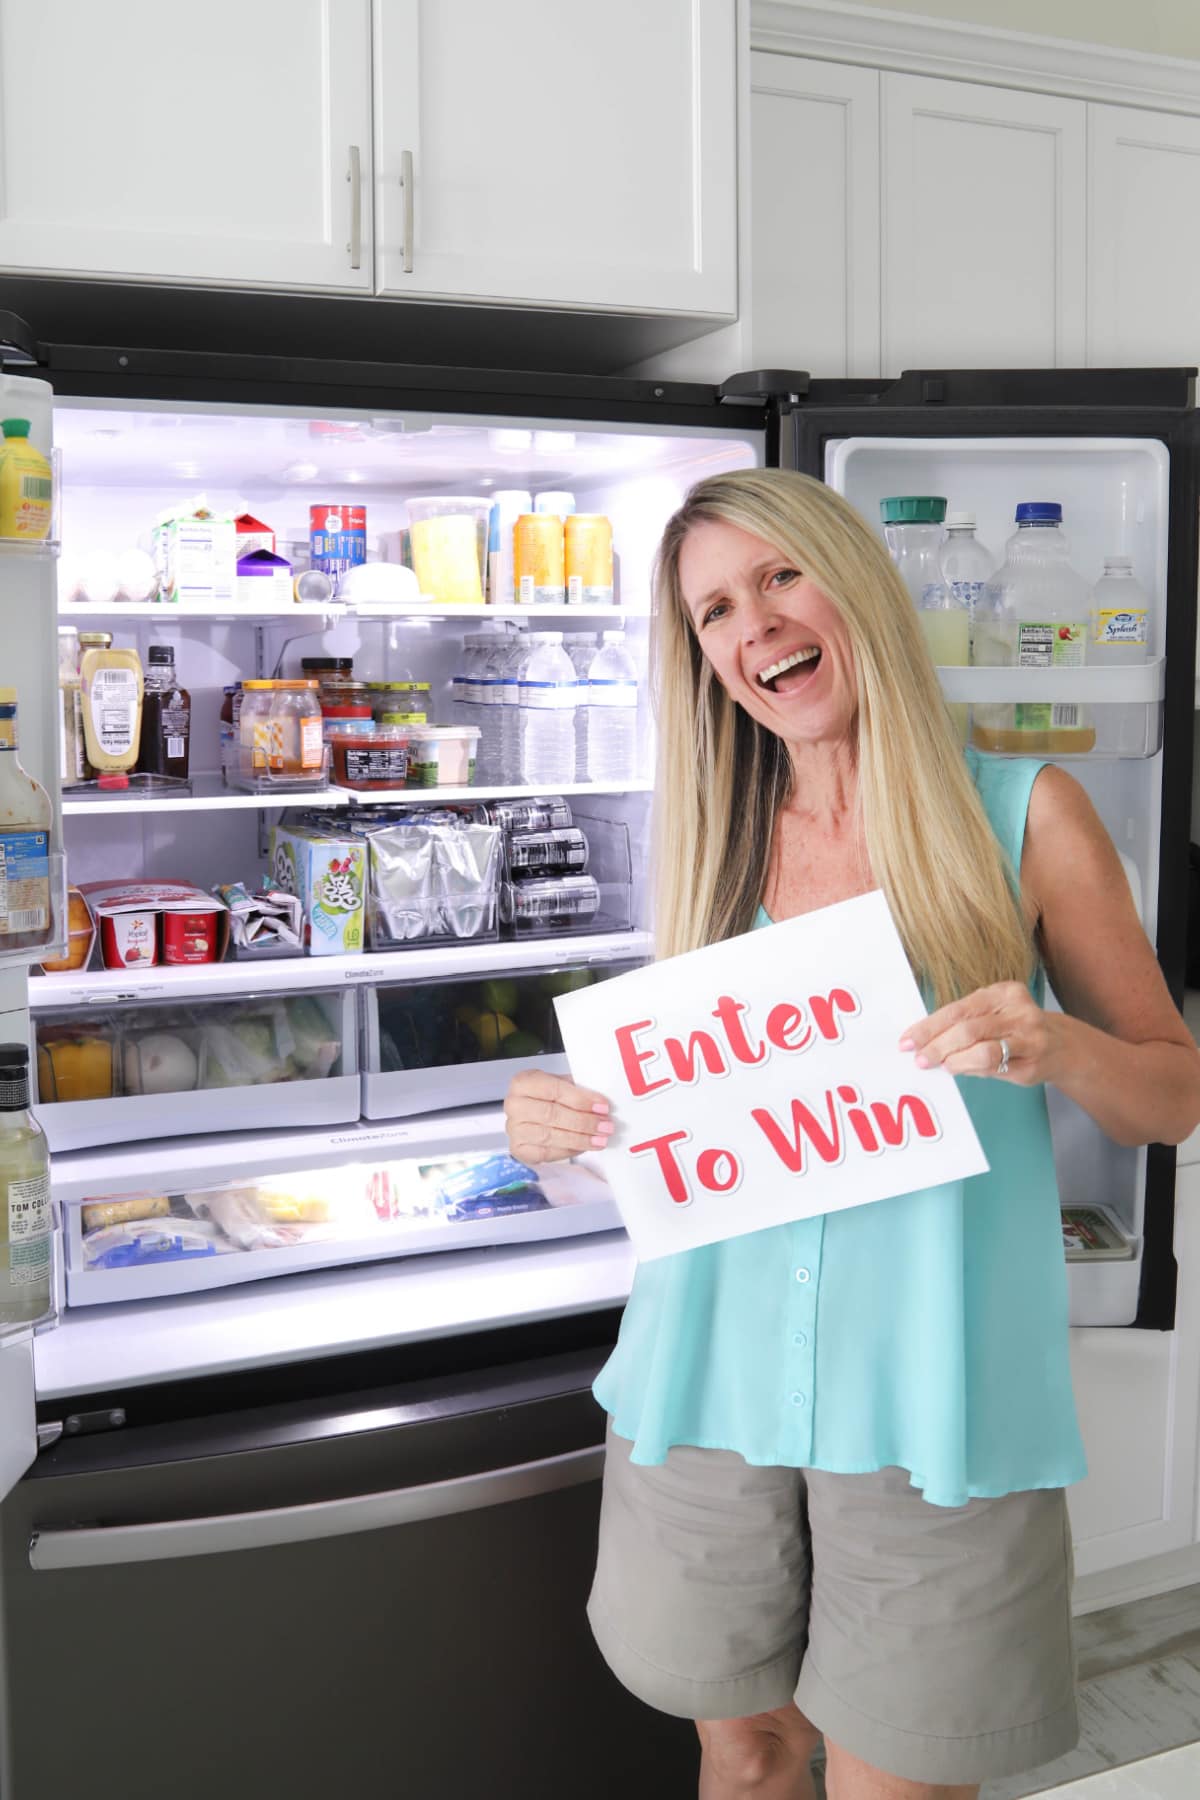 Woman holding enter to win sign in front of fridge